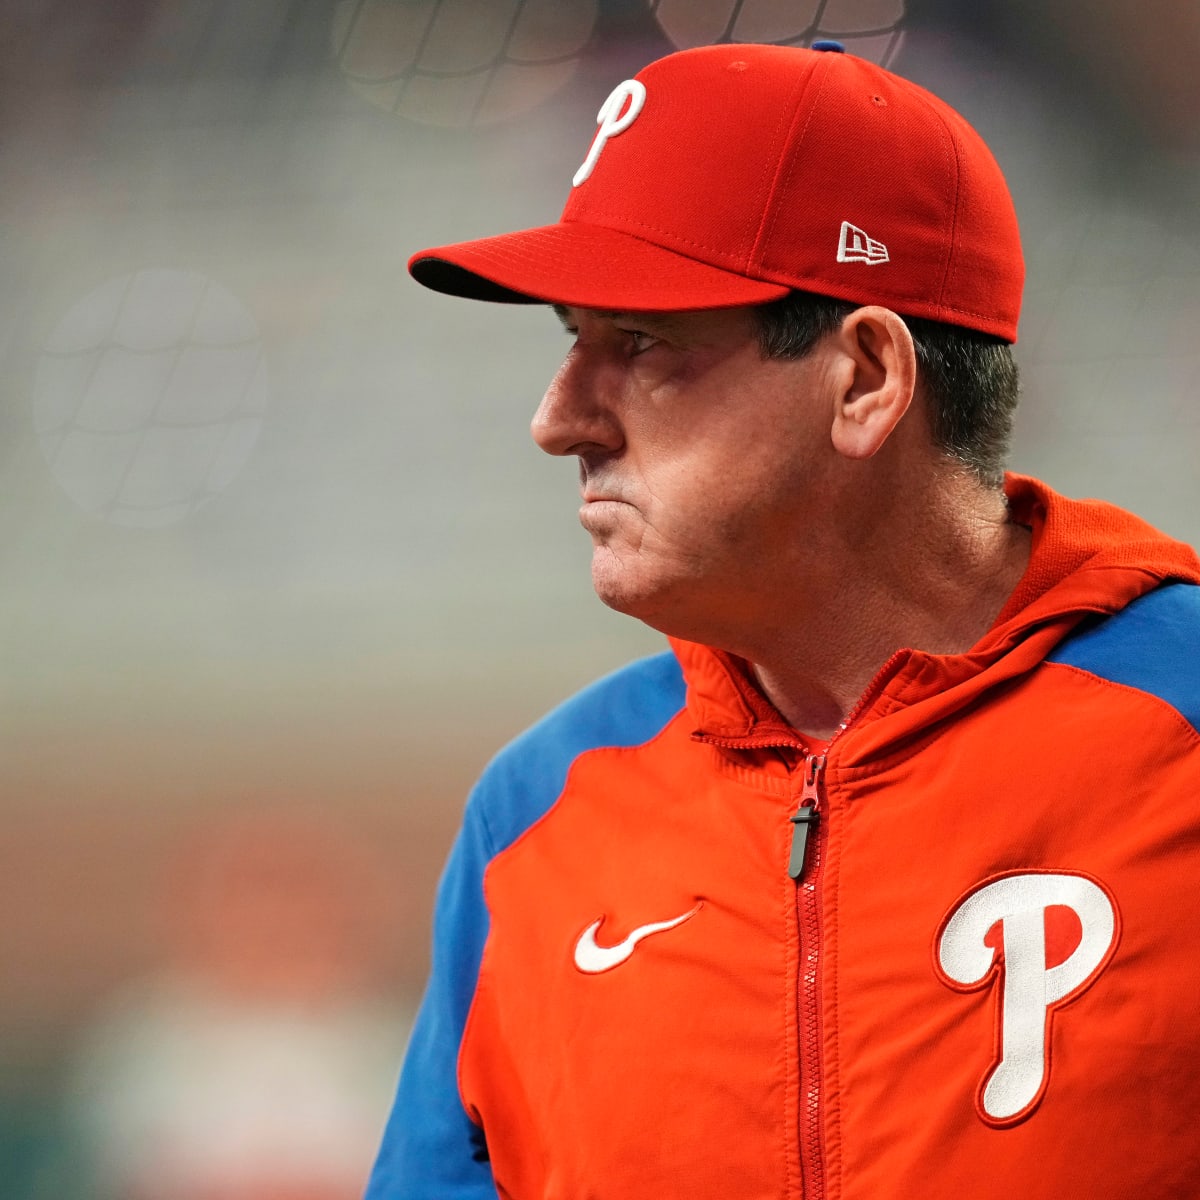 Wheeler, Alvarado and Thomson revisit decision that ended magical 2022  season  Phillies Nation - Your source for Philadelphia Phillies news,  opinion, history, rumors, events, and other fun stuff.